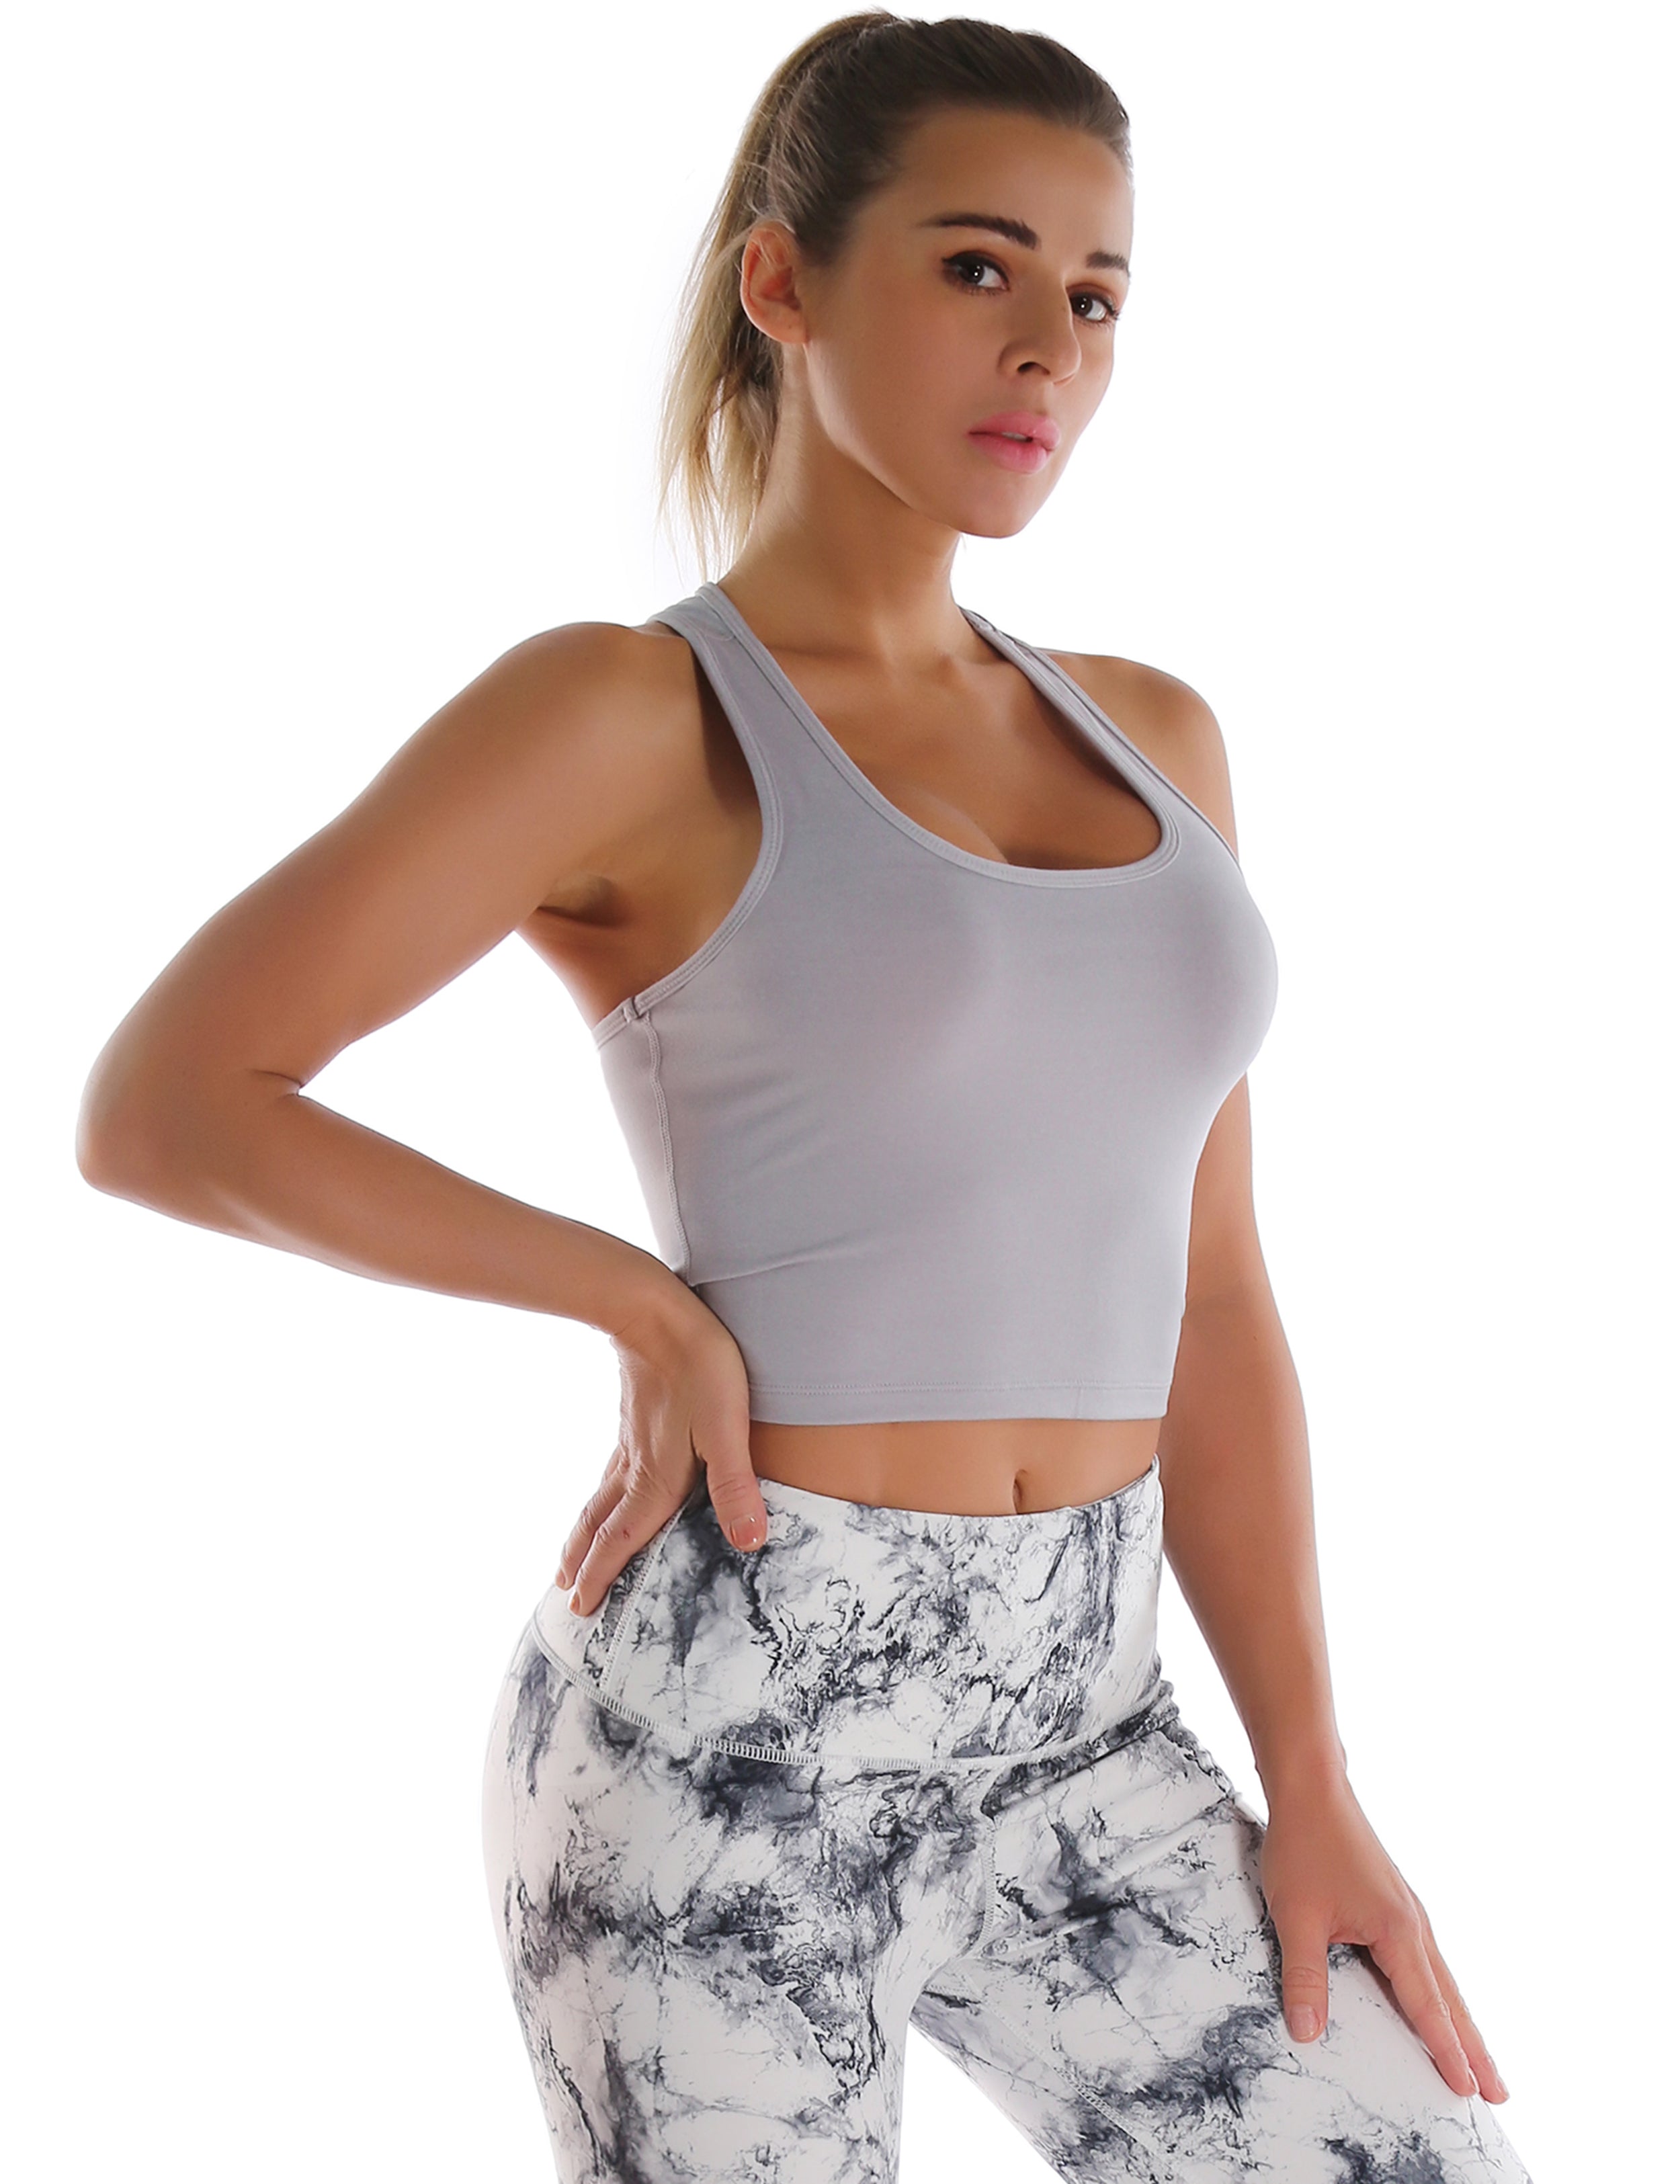 Racerback Athletic Crop Tank Tops heathergray 92%Nylon/8%Spandex(Cotton Soft) Designed for Golf Tight Fit So buttery soft, it feels weightless Sweat-wicking Four-way stretch Breathable Contours your body Sits below the waistband for moderate, everyday coverage